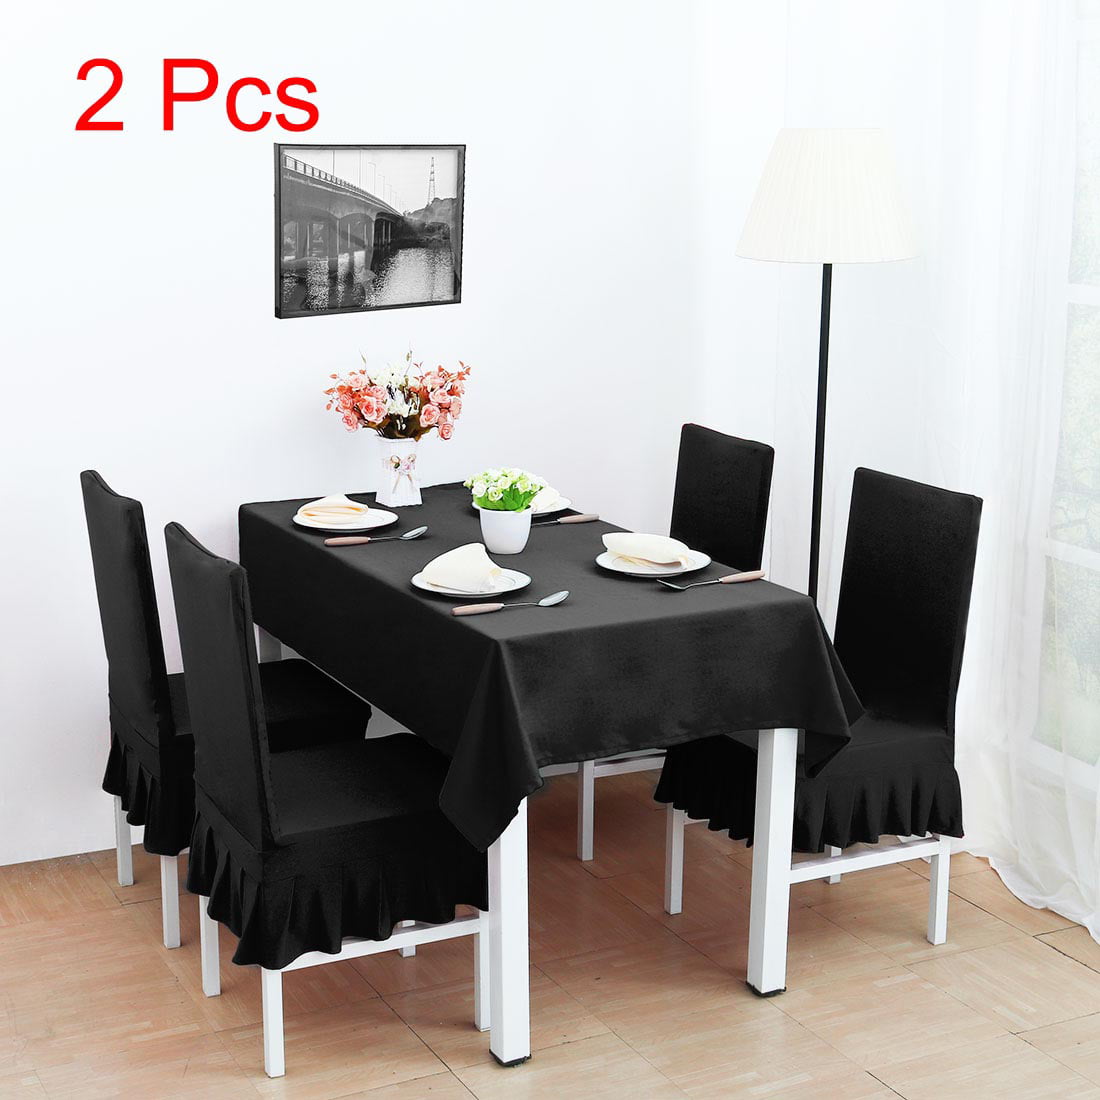 Details about   US Spandex Stretch Banquet Chair Cover Dining Room Seat Home Wedding Party Decor 